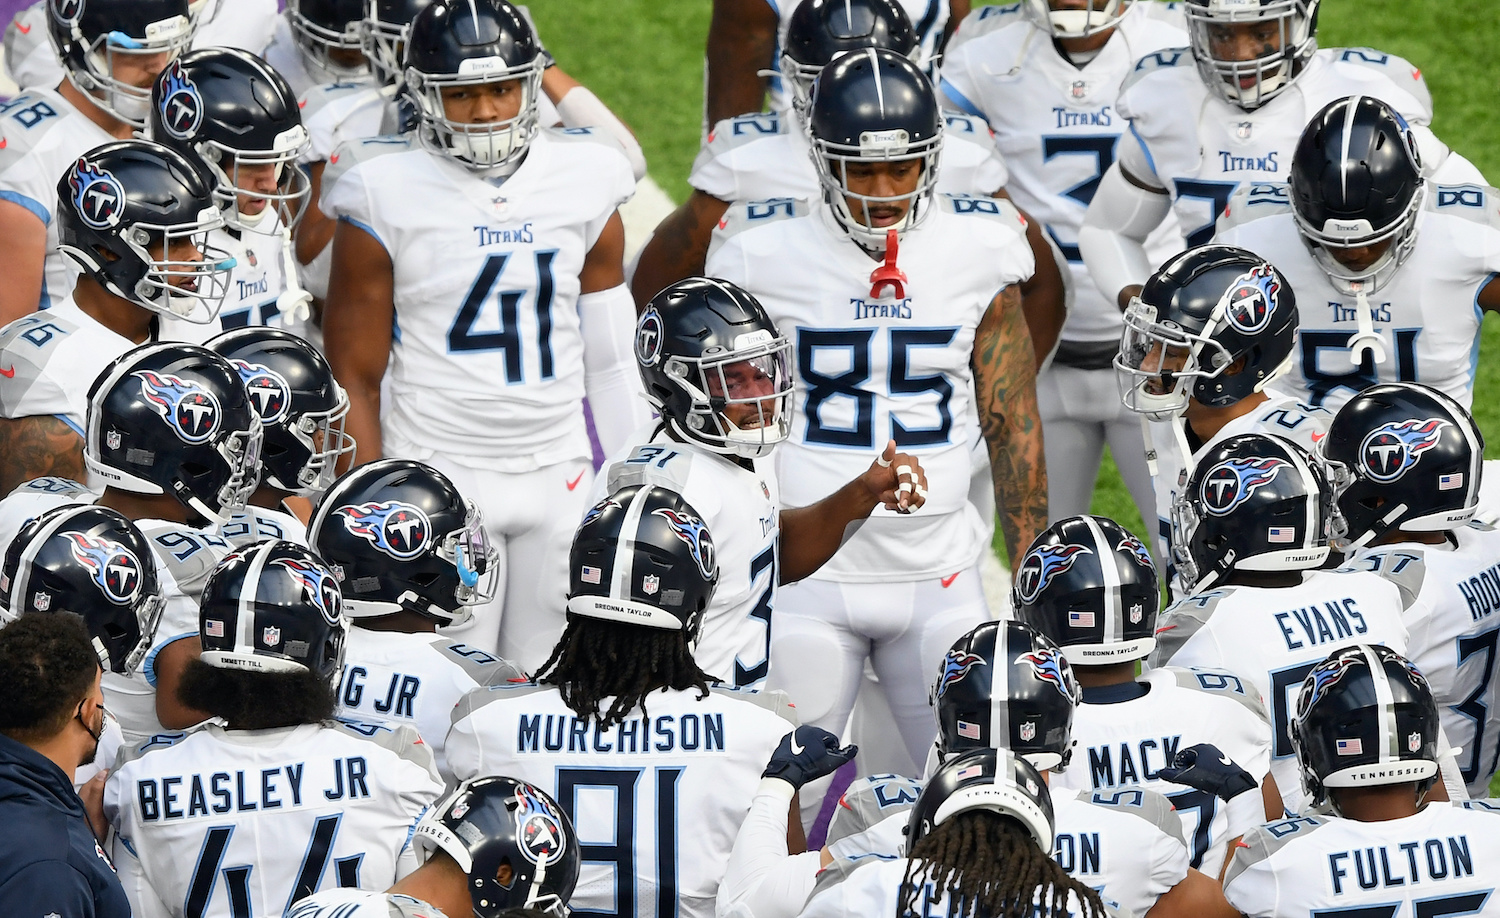 Kevin Byard #31 of the Tennessee Titans speaks to his teammates during warmups before the game against the Minnesota Vikings at U.S. Bank Stadium on September 27, 2020 in Minneapolis, Minnesota. (Photo by Hannah Foslien/Getty Images)